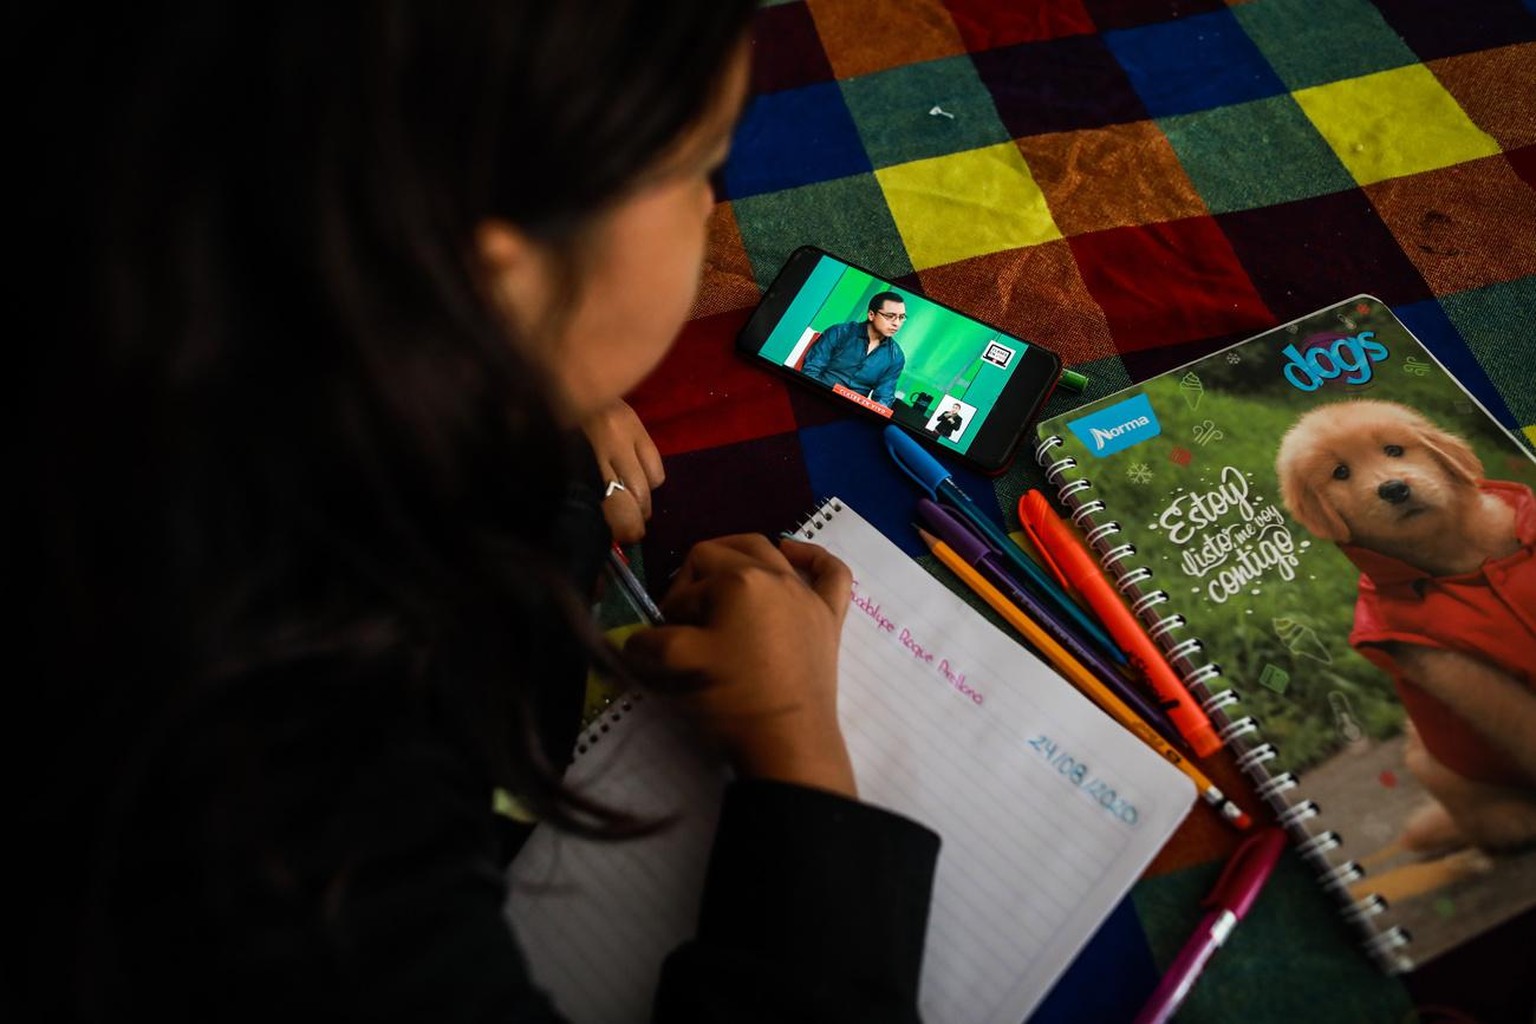 epa08623260 Zury takes her first virtual class in Acapulco, Mexico, 24 August 2020. More than 30 million Mexican students began the school year from home on 24 August due to the COVID-19 pandemic. EPA ...